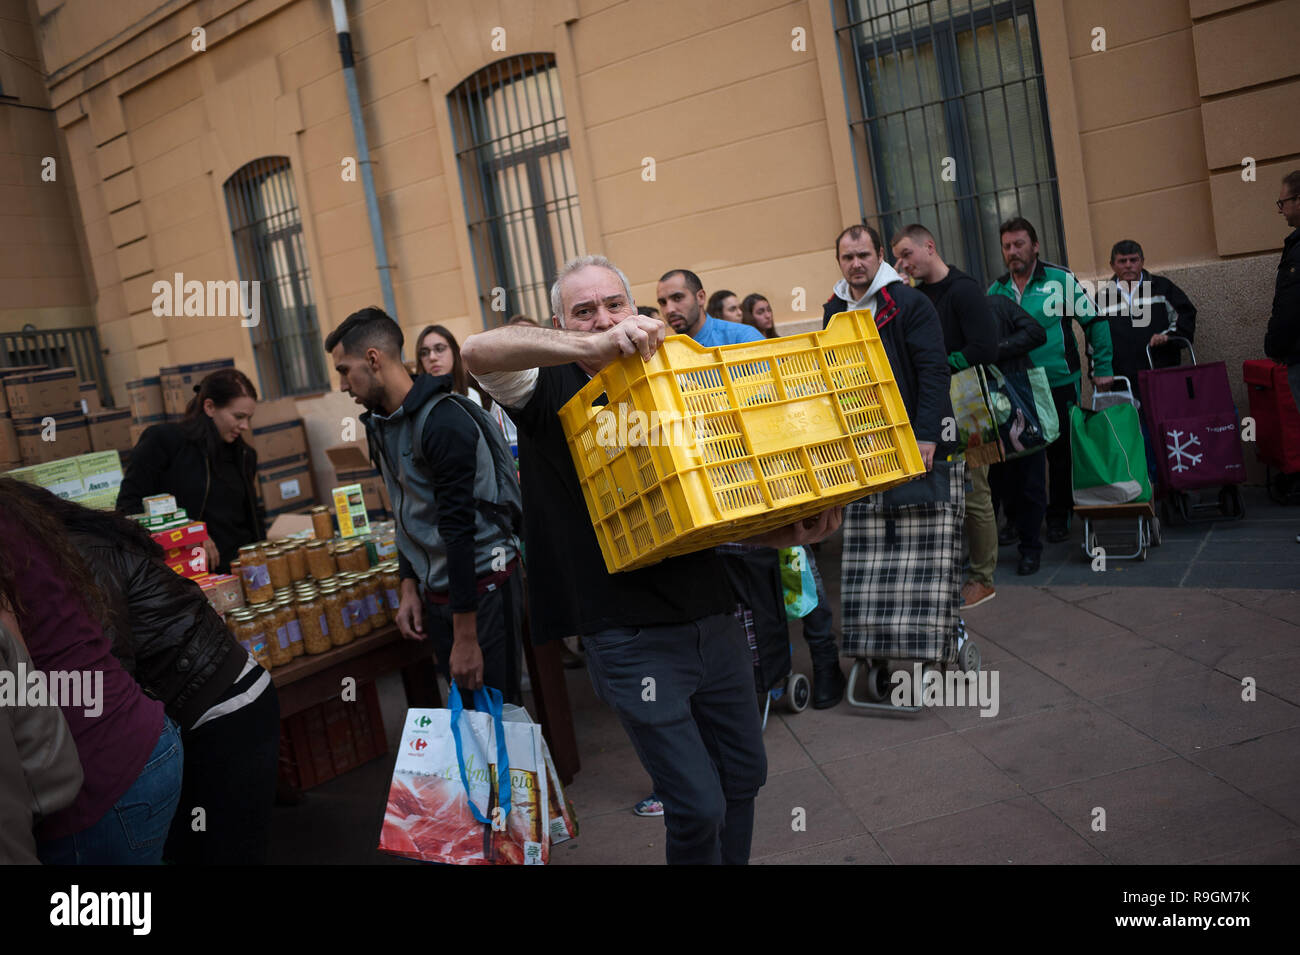 Malaga, Spain. 24th Dec, 2018. A volunteer is seen carrying a box with food  during the annual charity distribution of food by the NGO "Ángeles  Malagueños de la Noche" (Malaga's Angels of